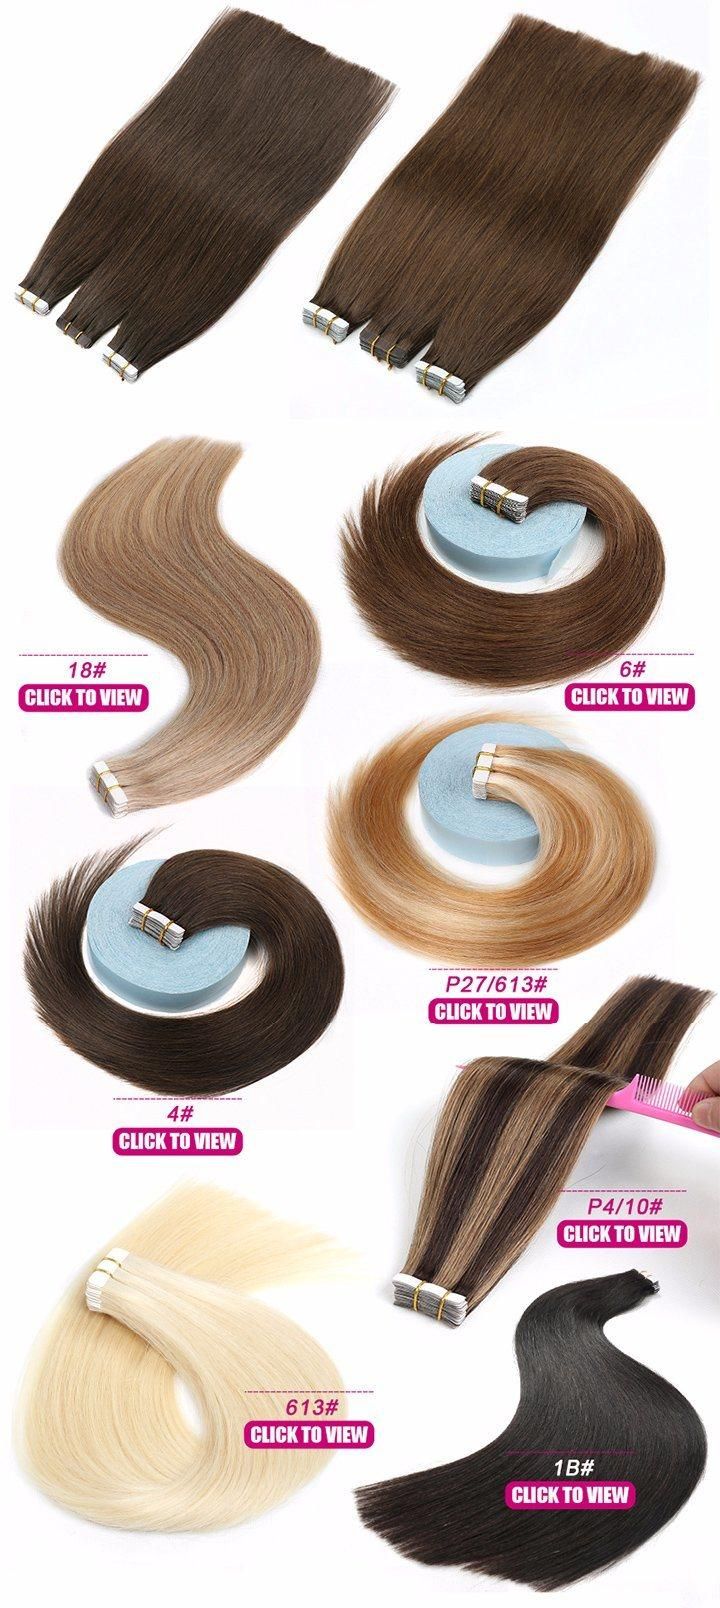 Wholesale Price Hair Extension Collection Products Remy Hair Clip on Hair Extensions